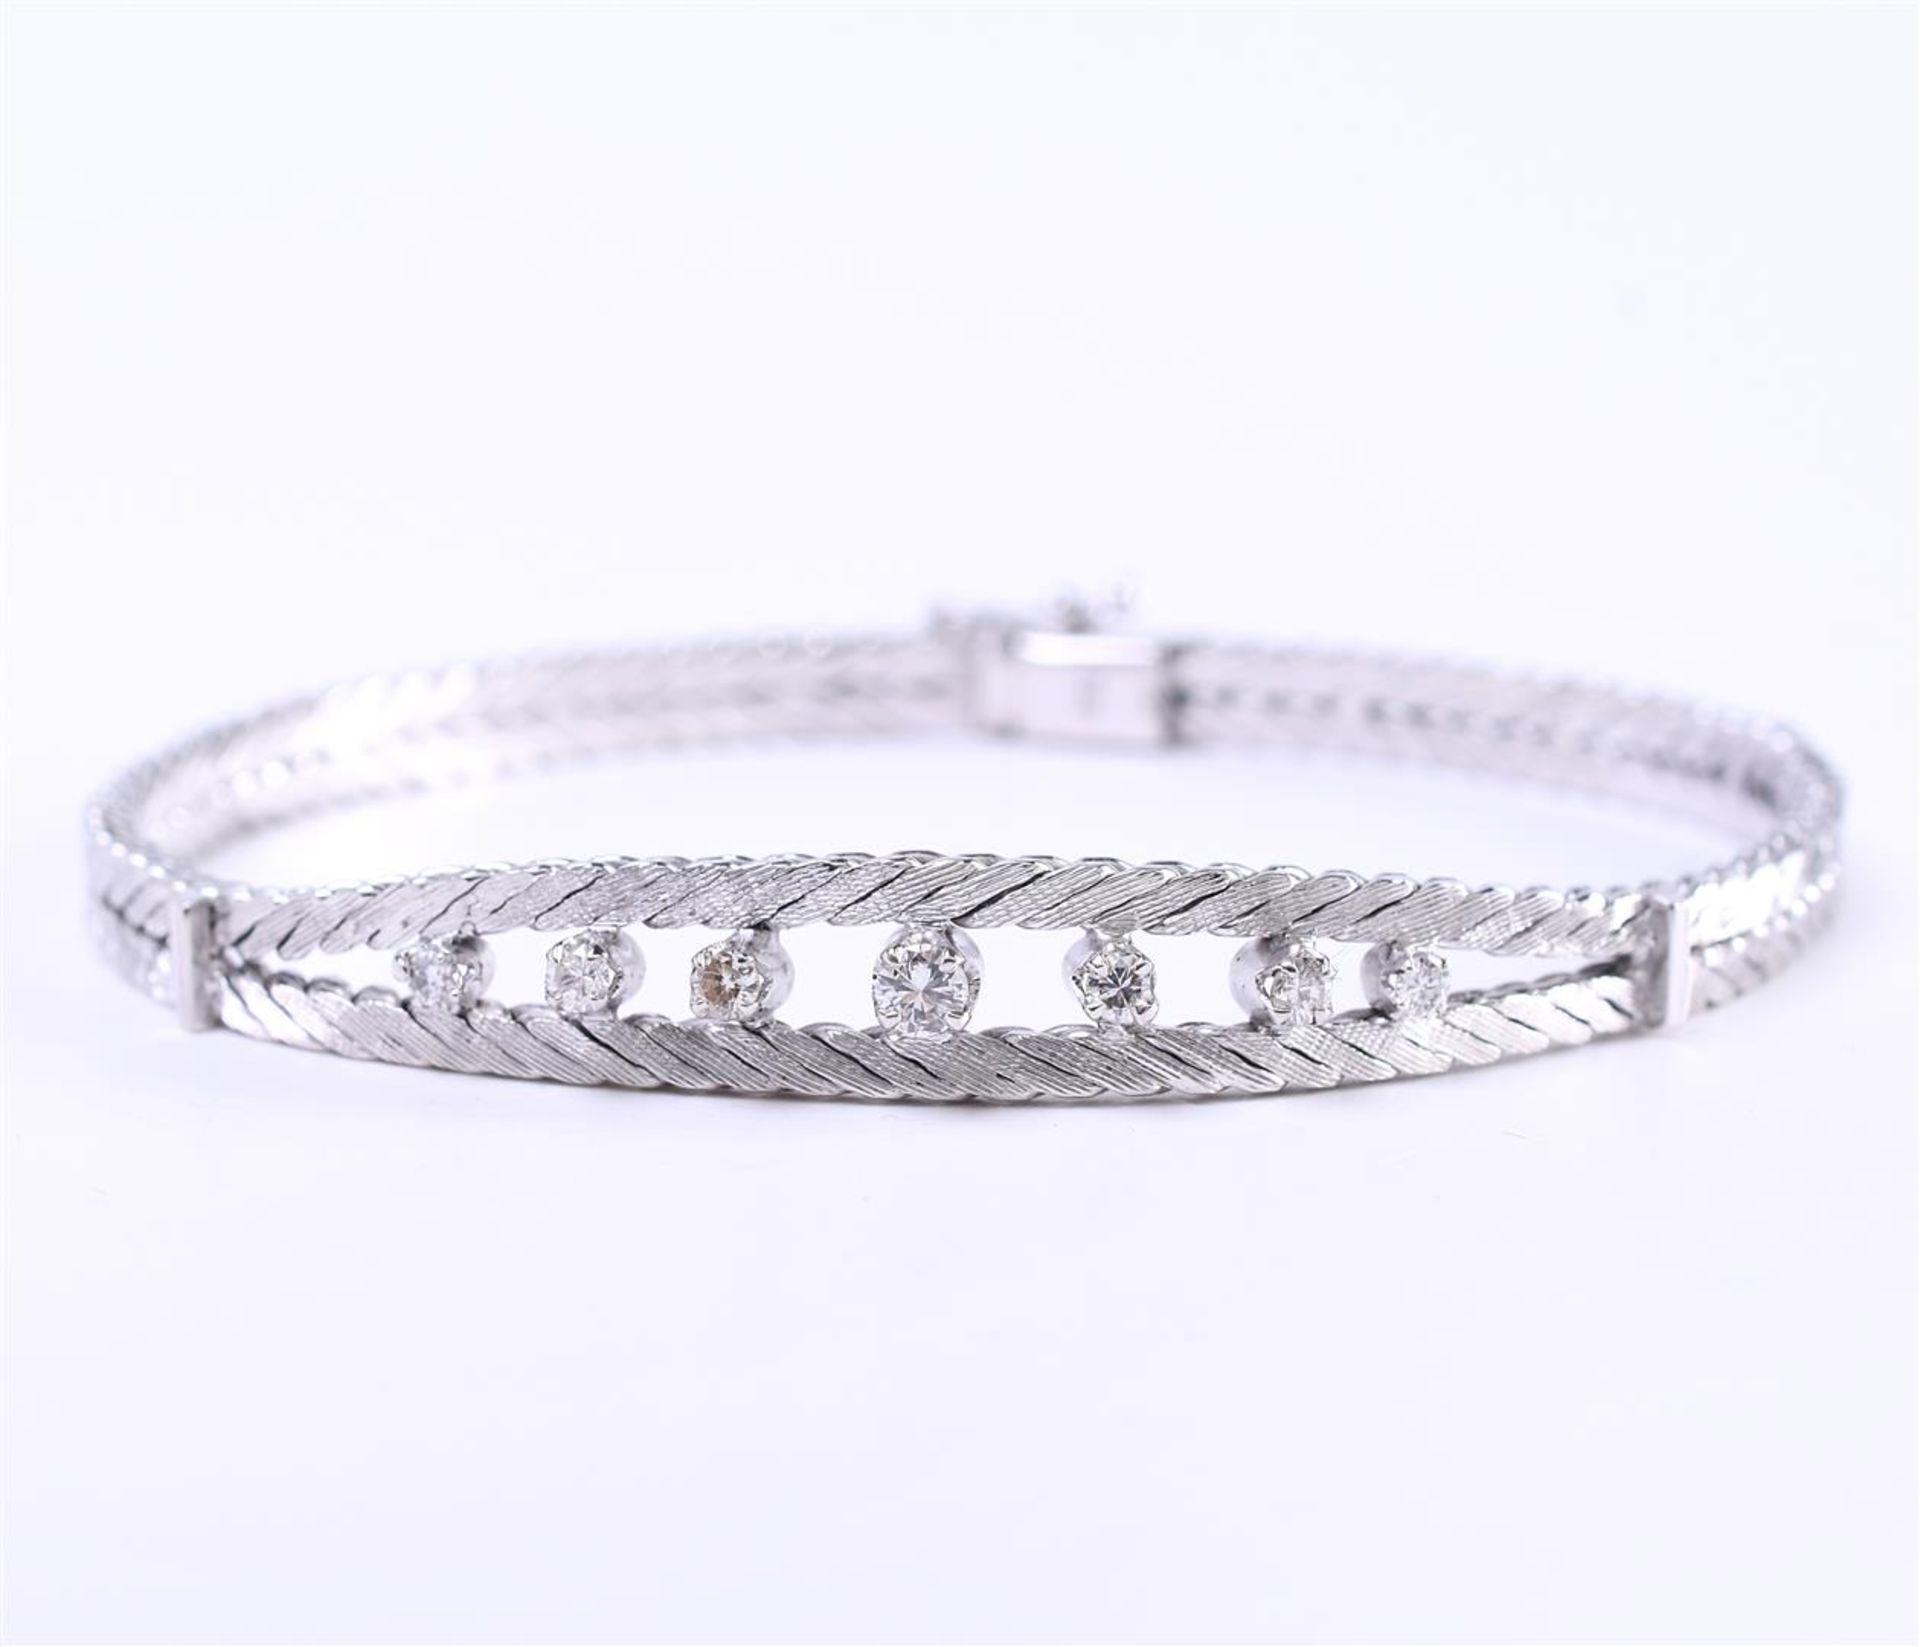 A white gold (14 kt) women's bracelet with a box clasp and safety eight